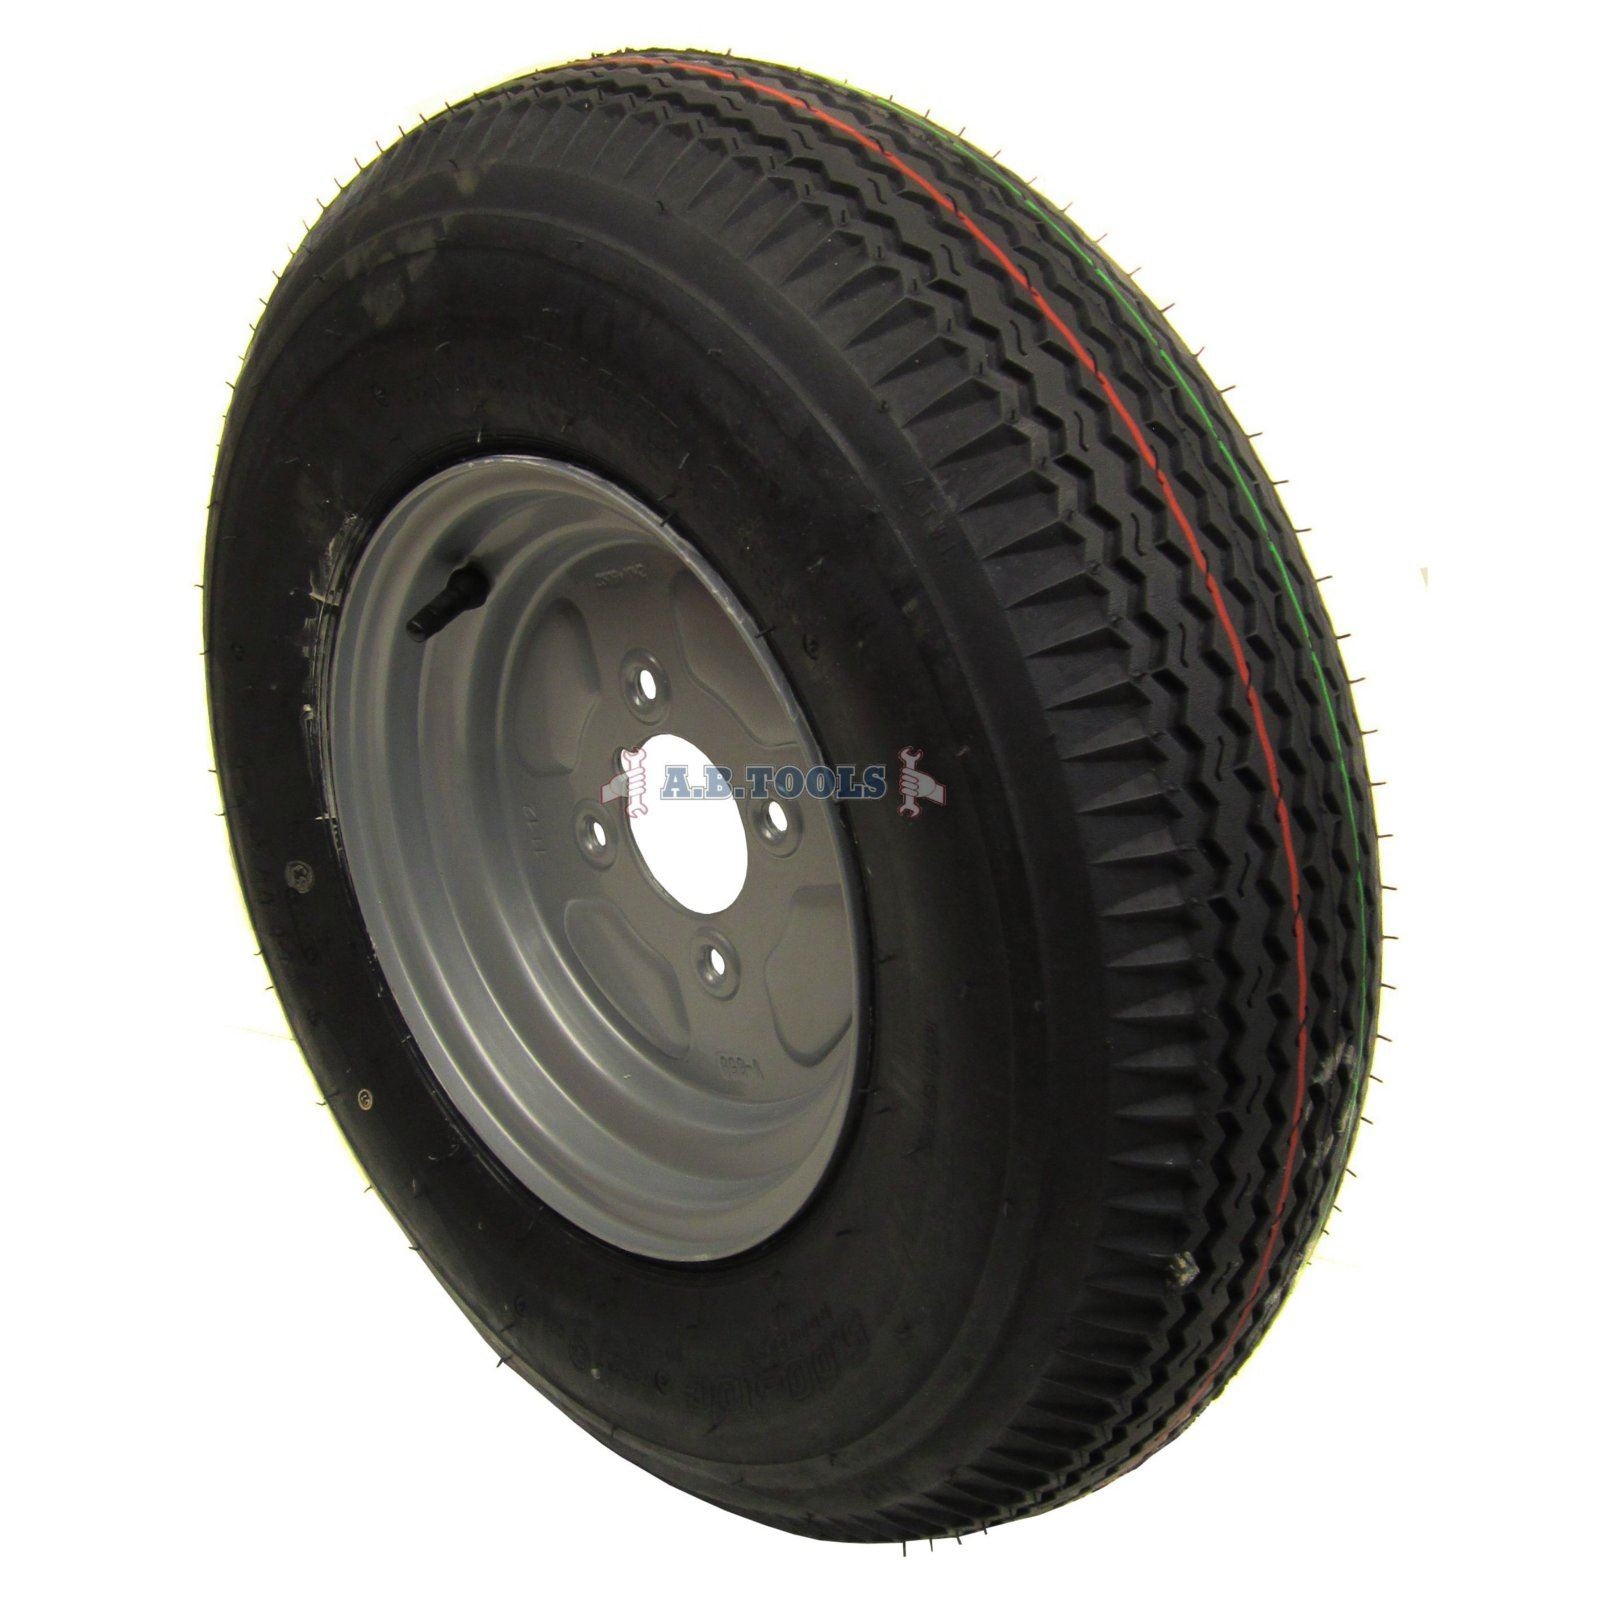 Trailer Wheel and Tyre 5.00 x 10" 4ply 4"pcd TRSP11